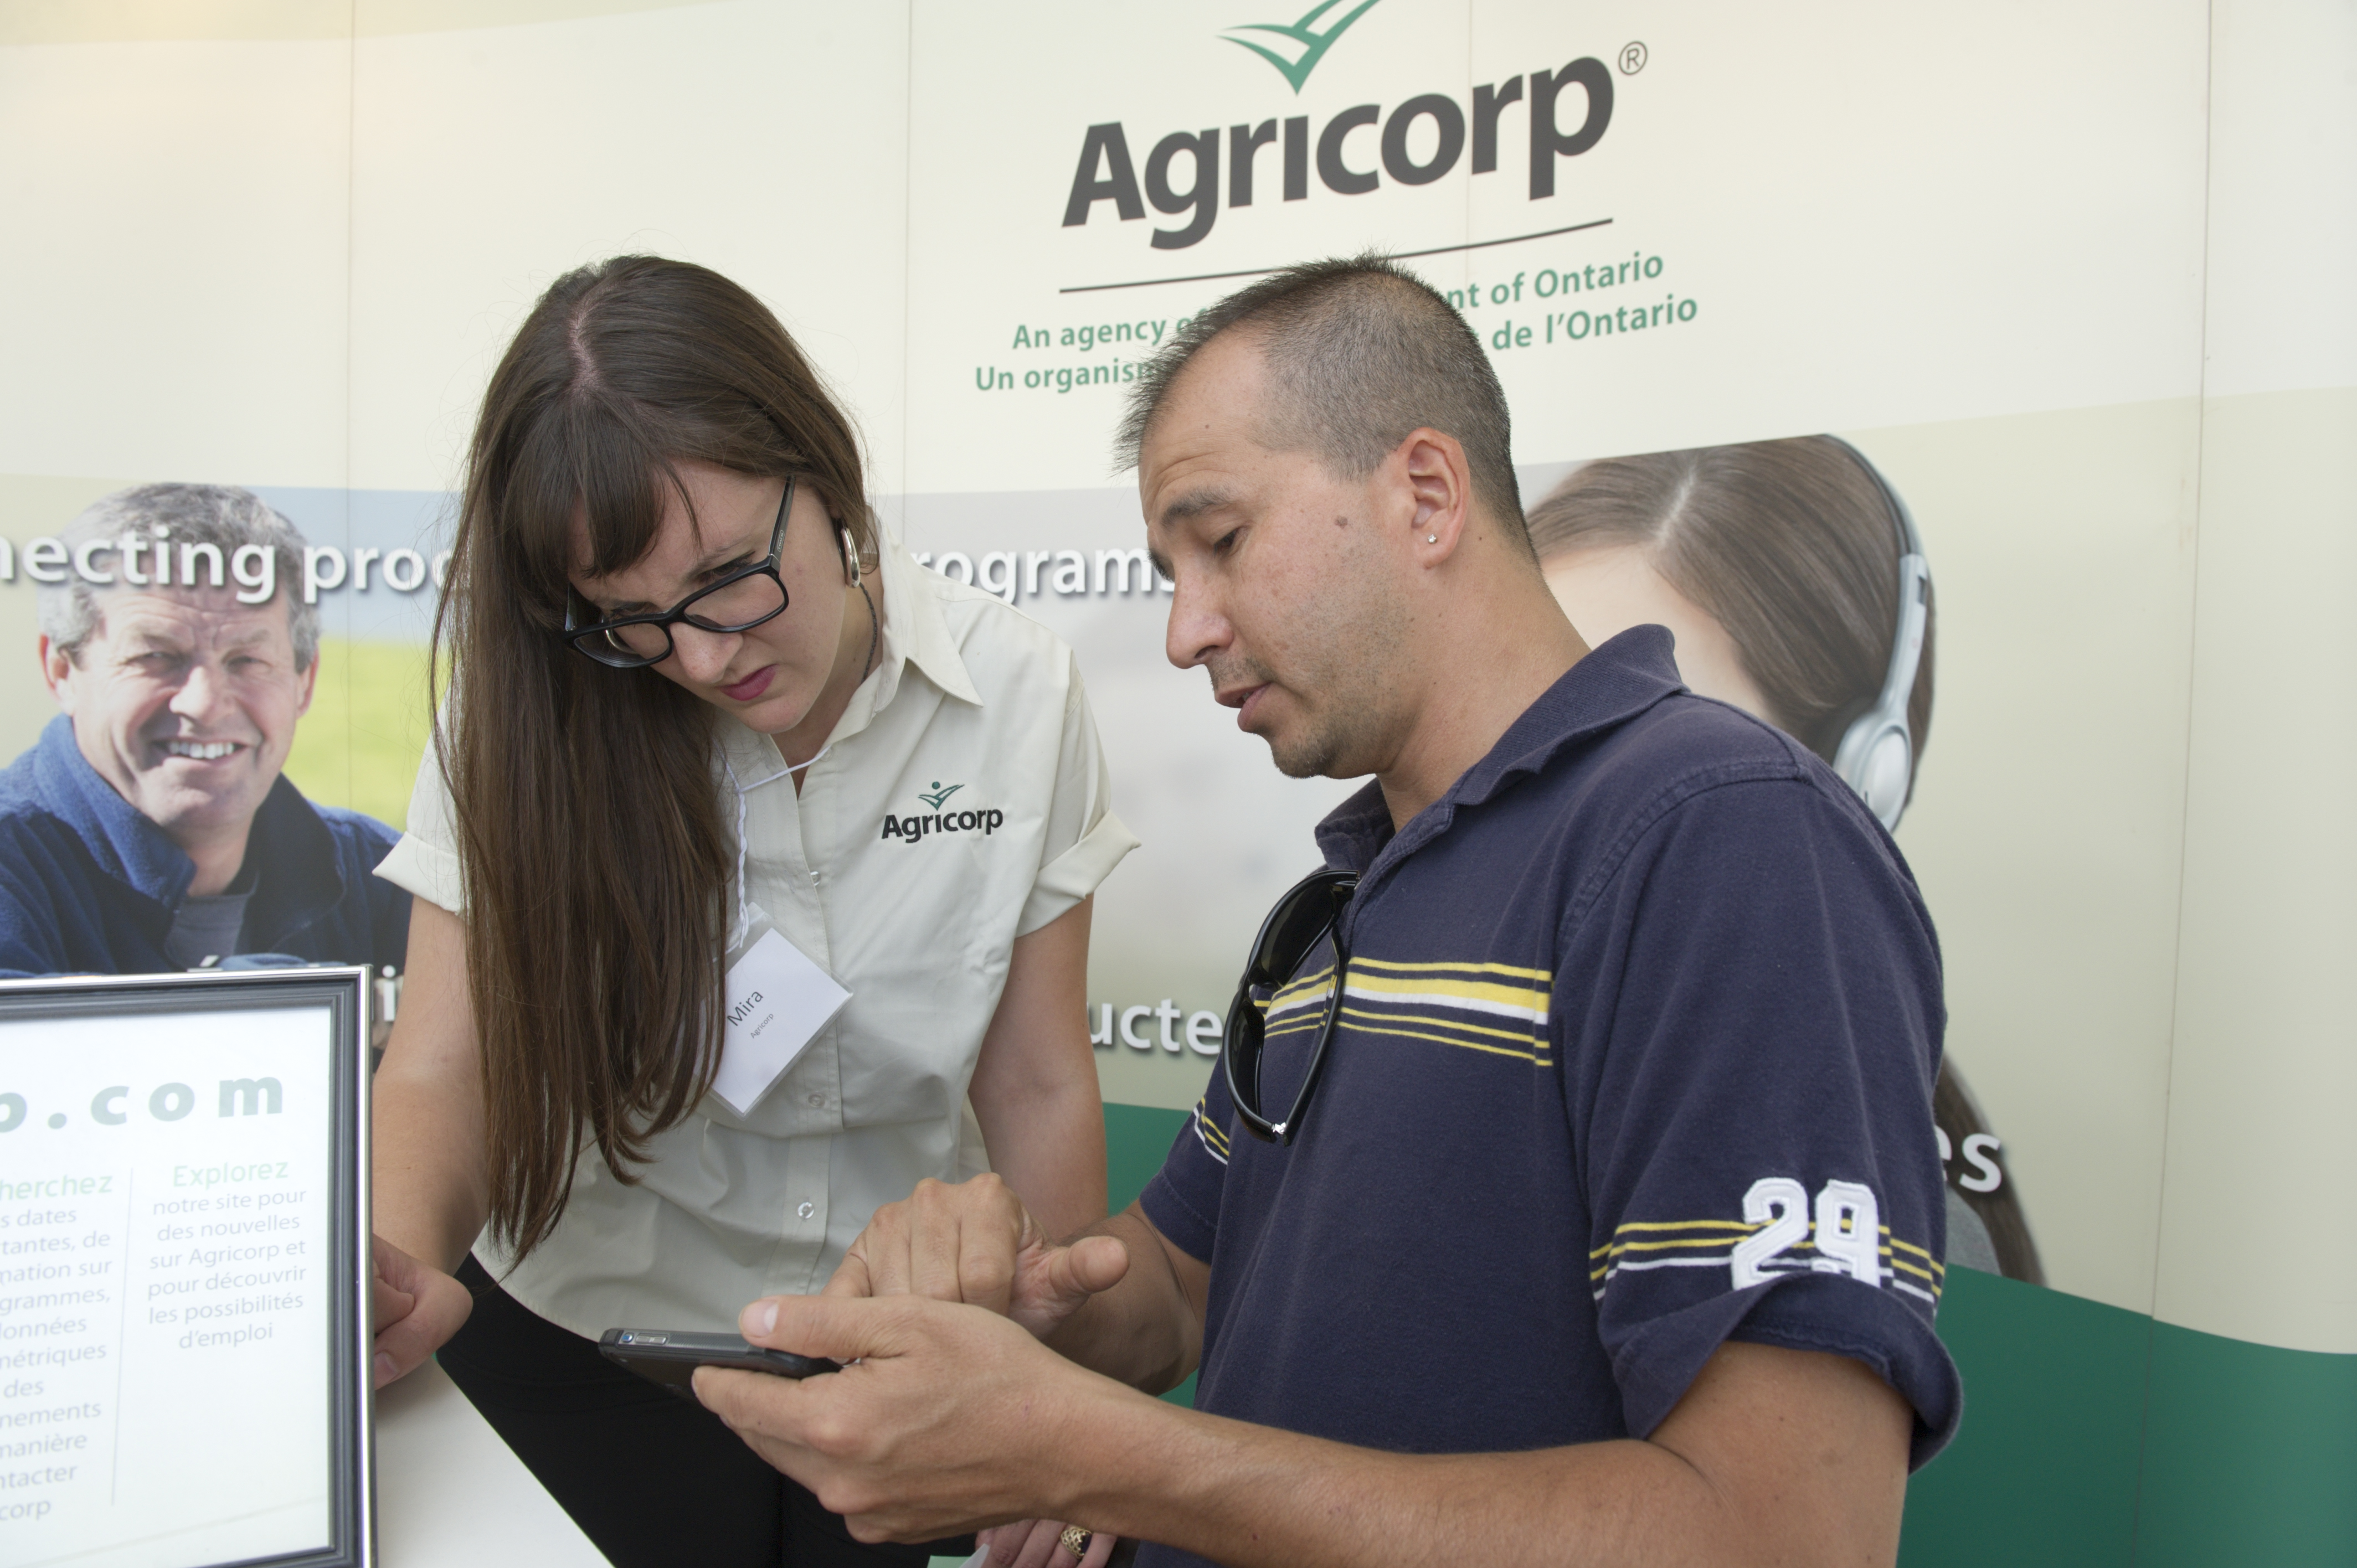 A producer shows an Agricorp staff member something on his phone at a farm show.